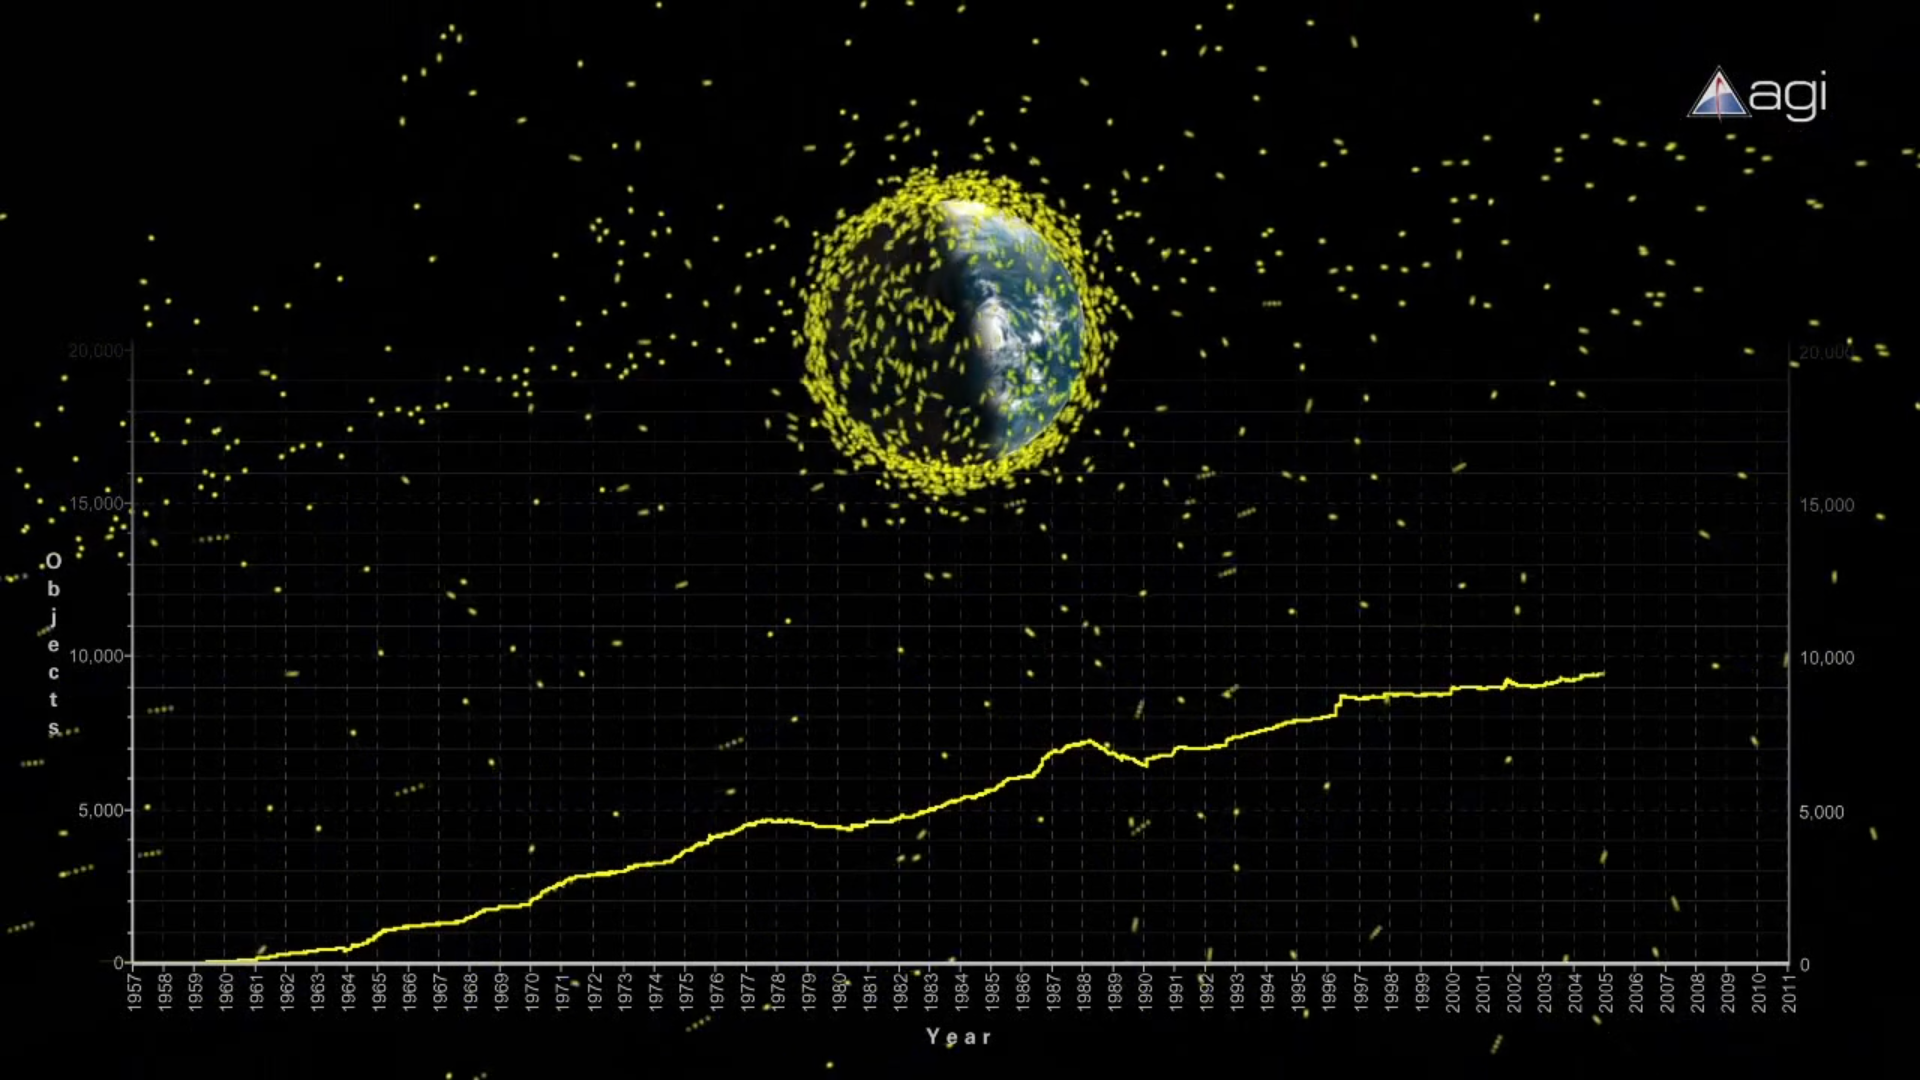 A Plot of the Number of Objects in Orbit Each Year